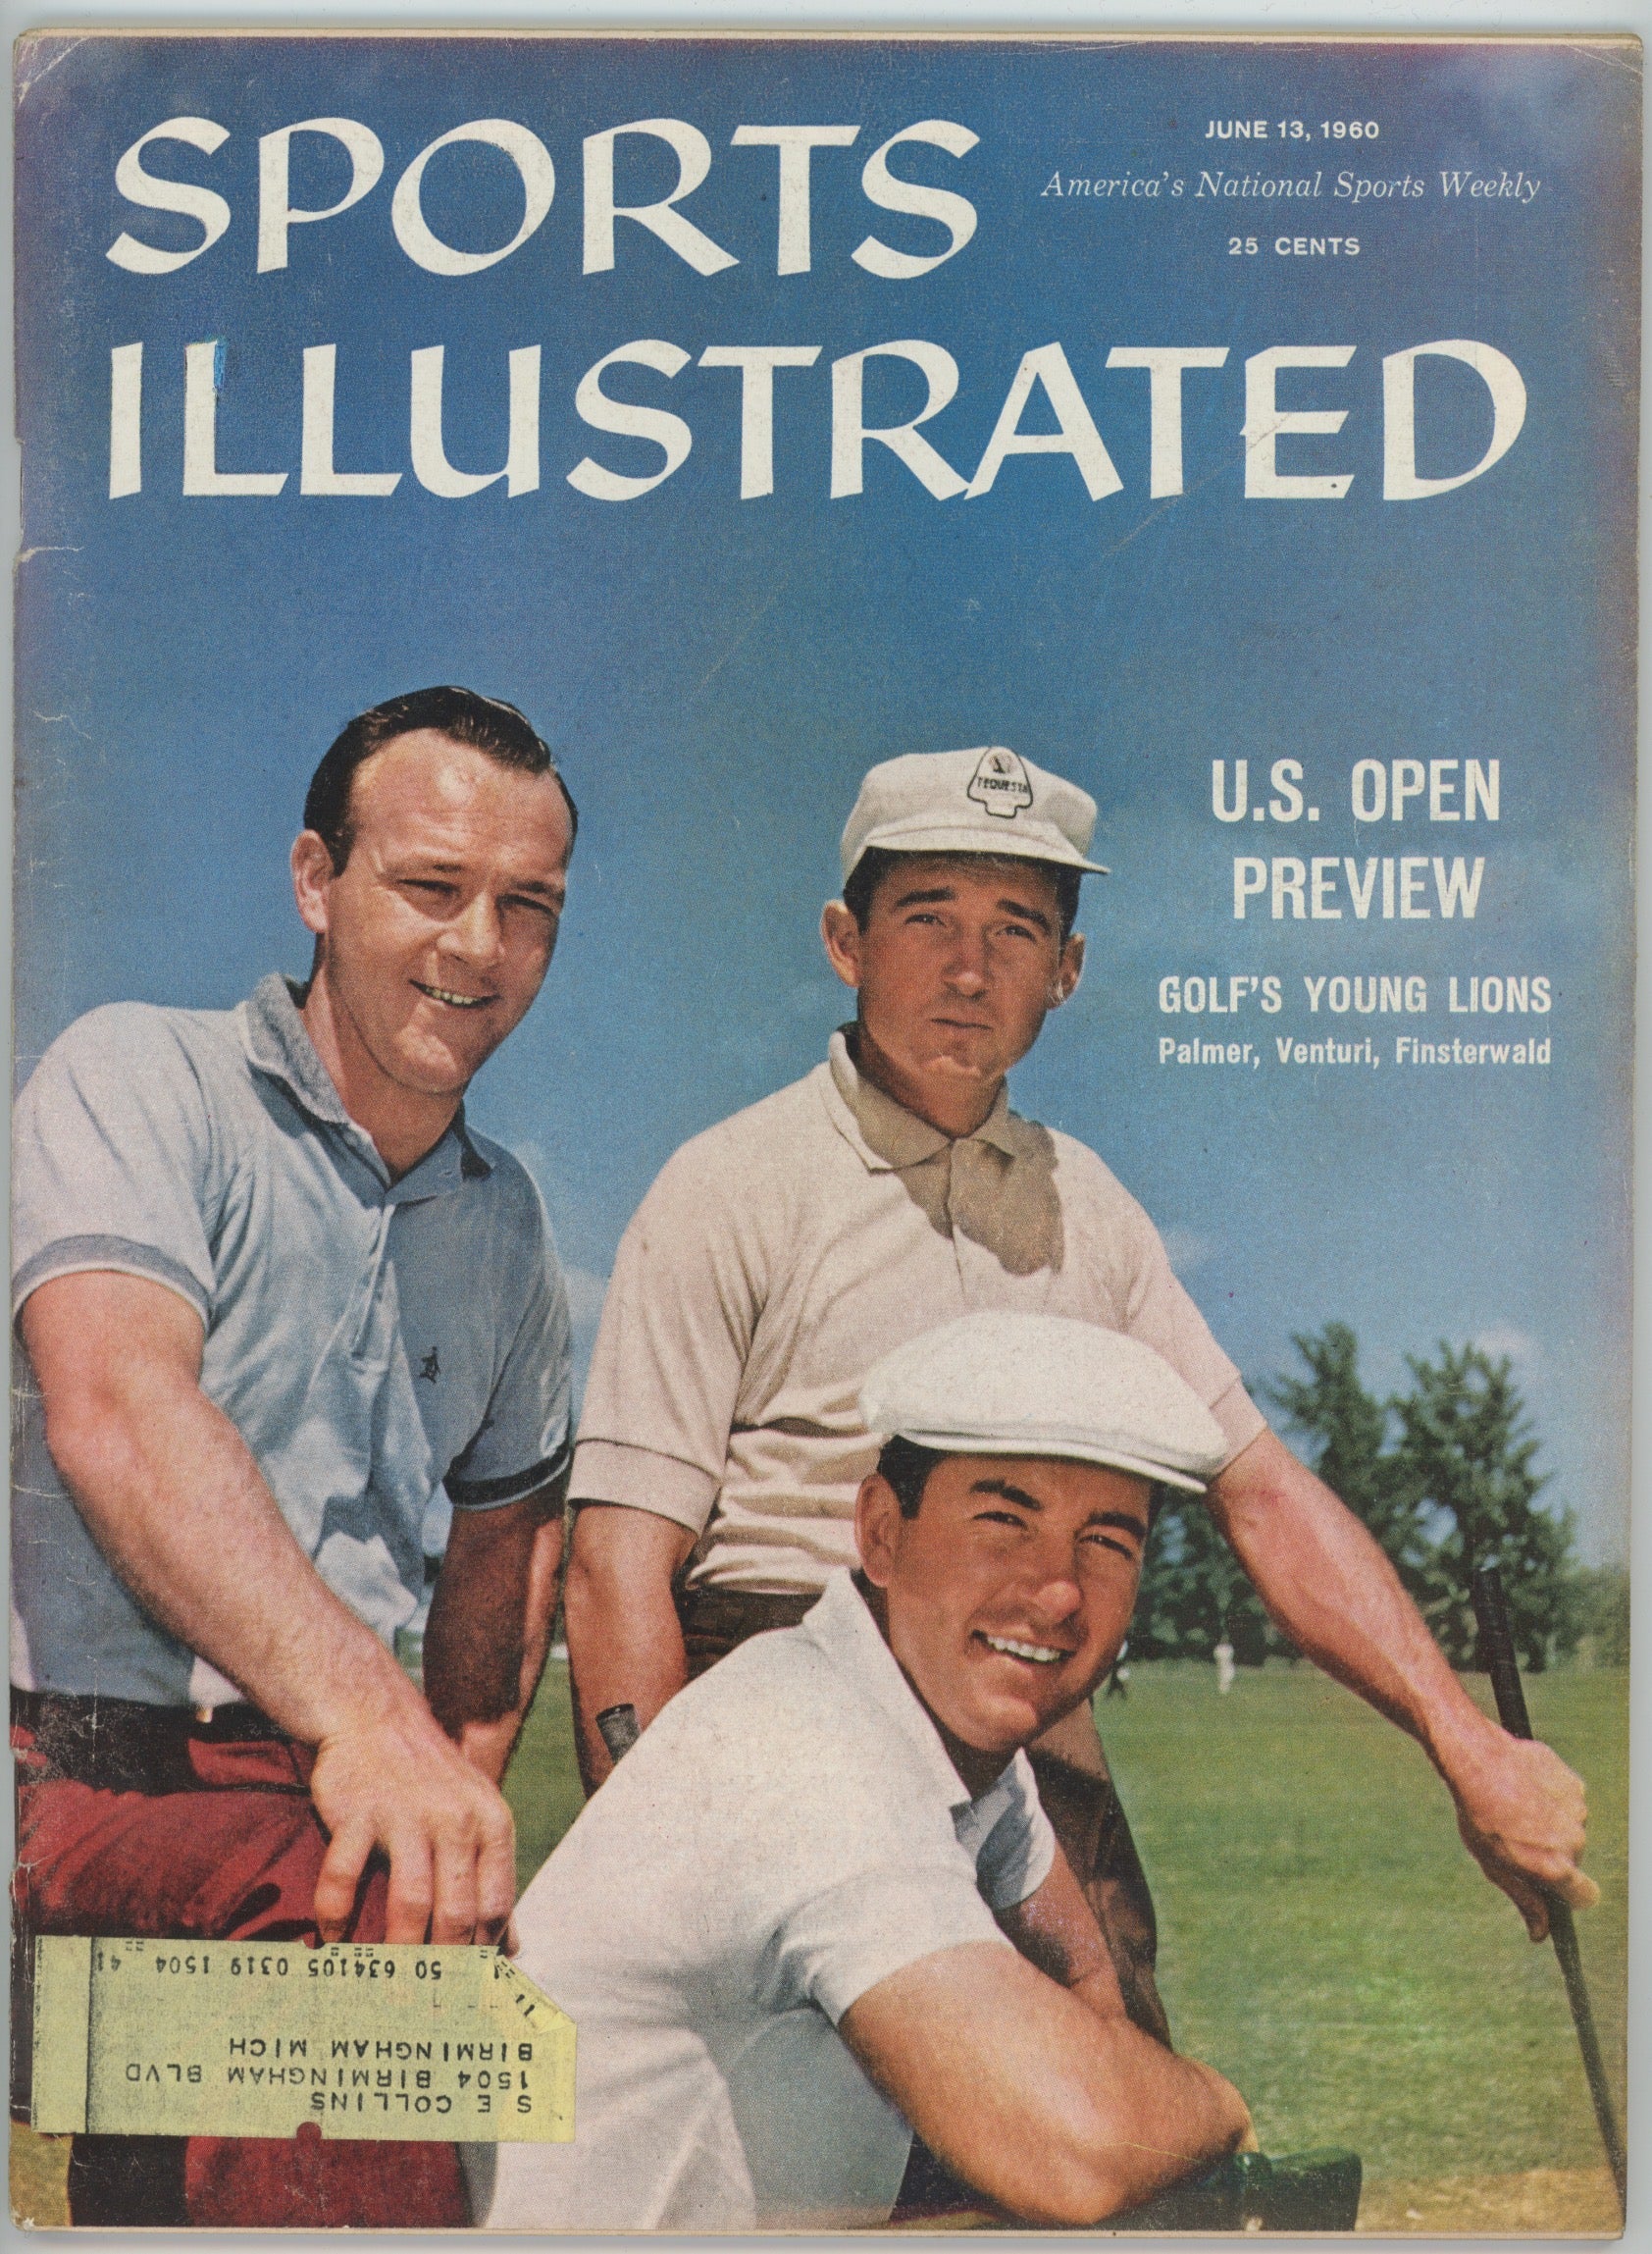 U.S. Open Preview with Arnold Palmer 6/13/60 EX ML